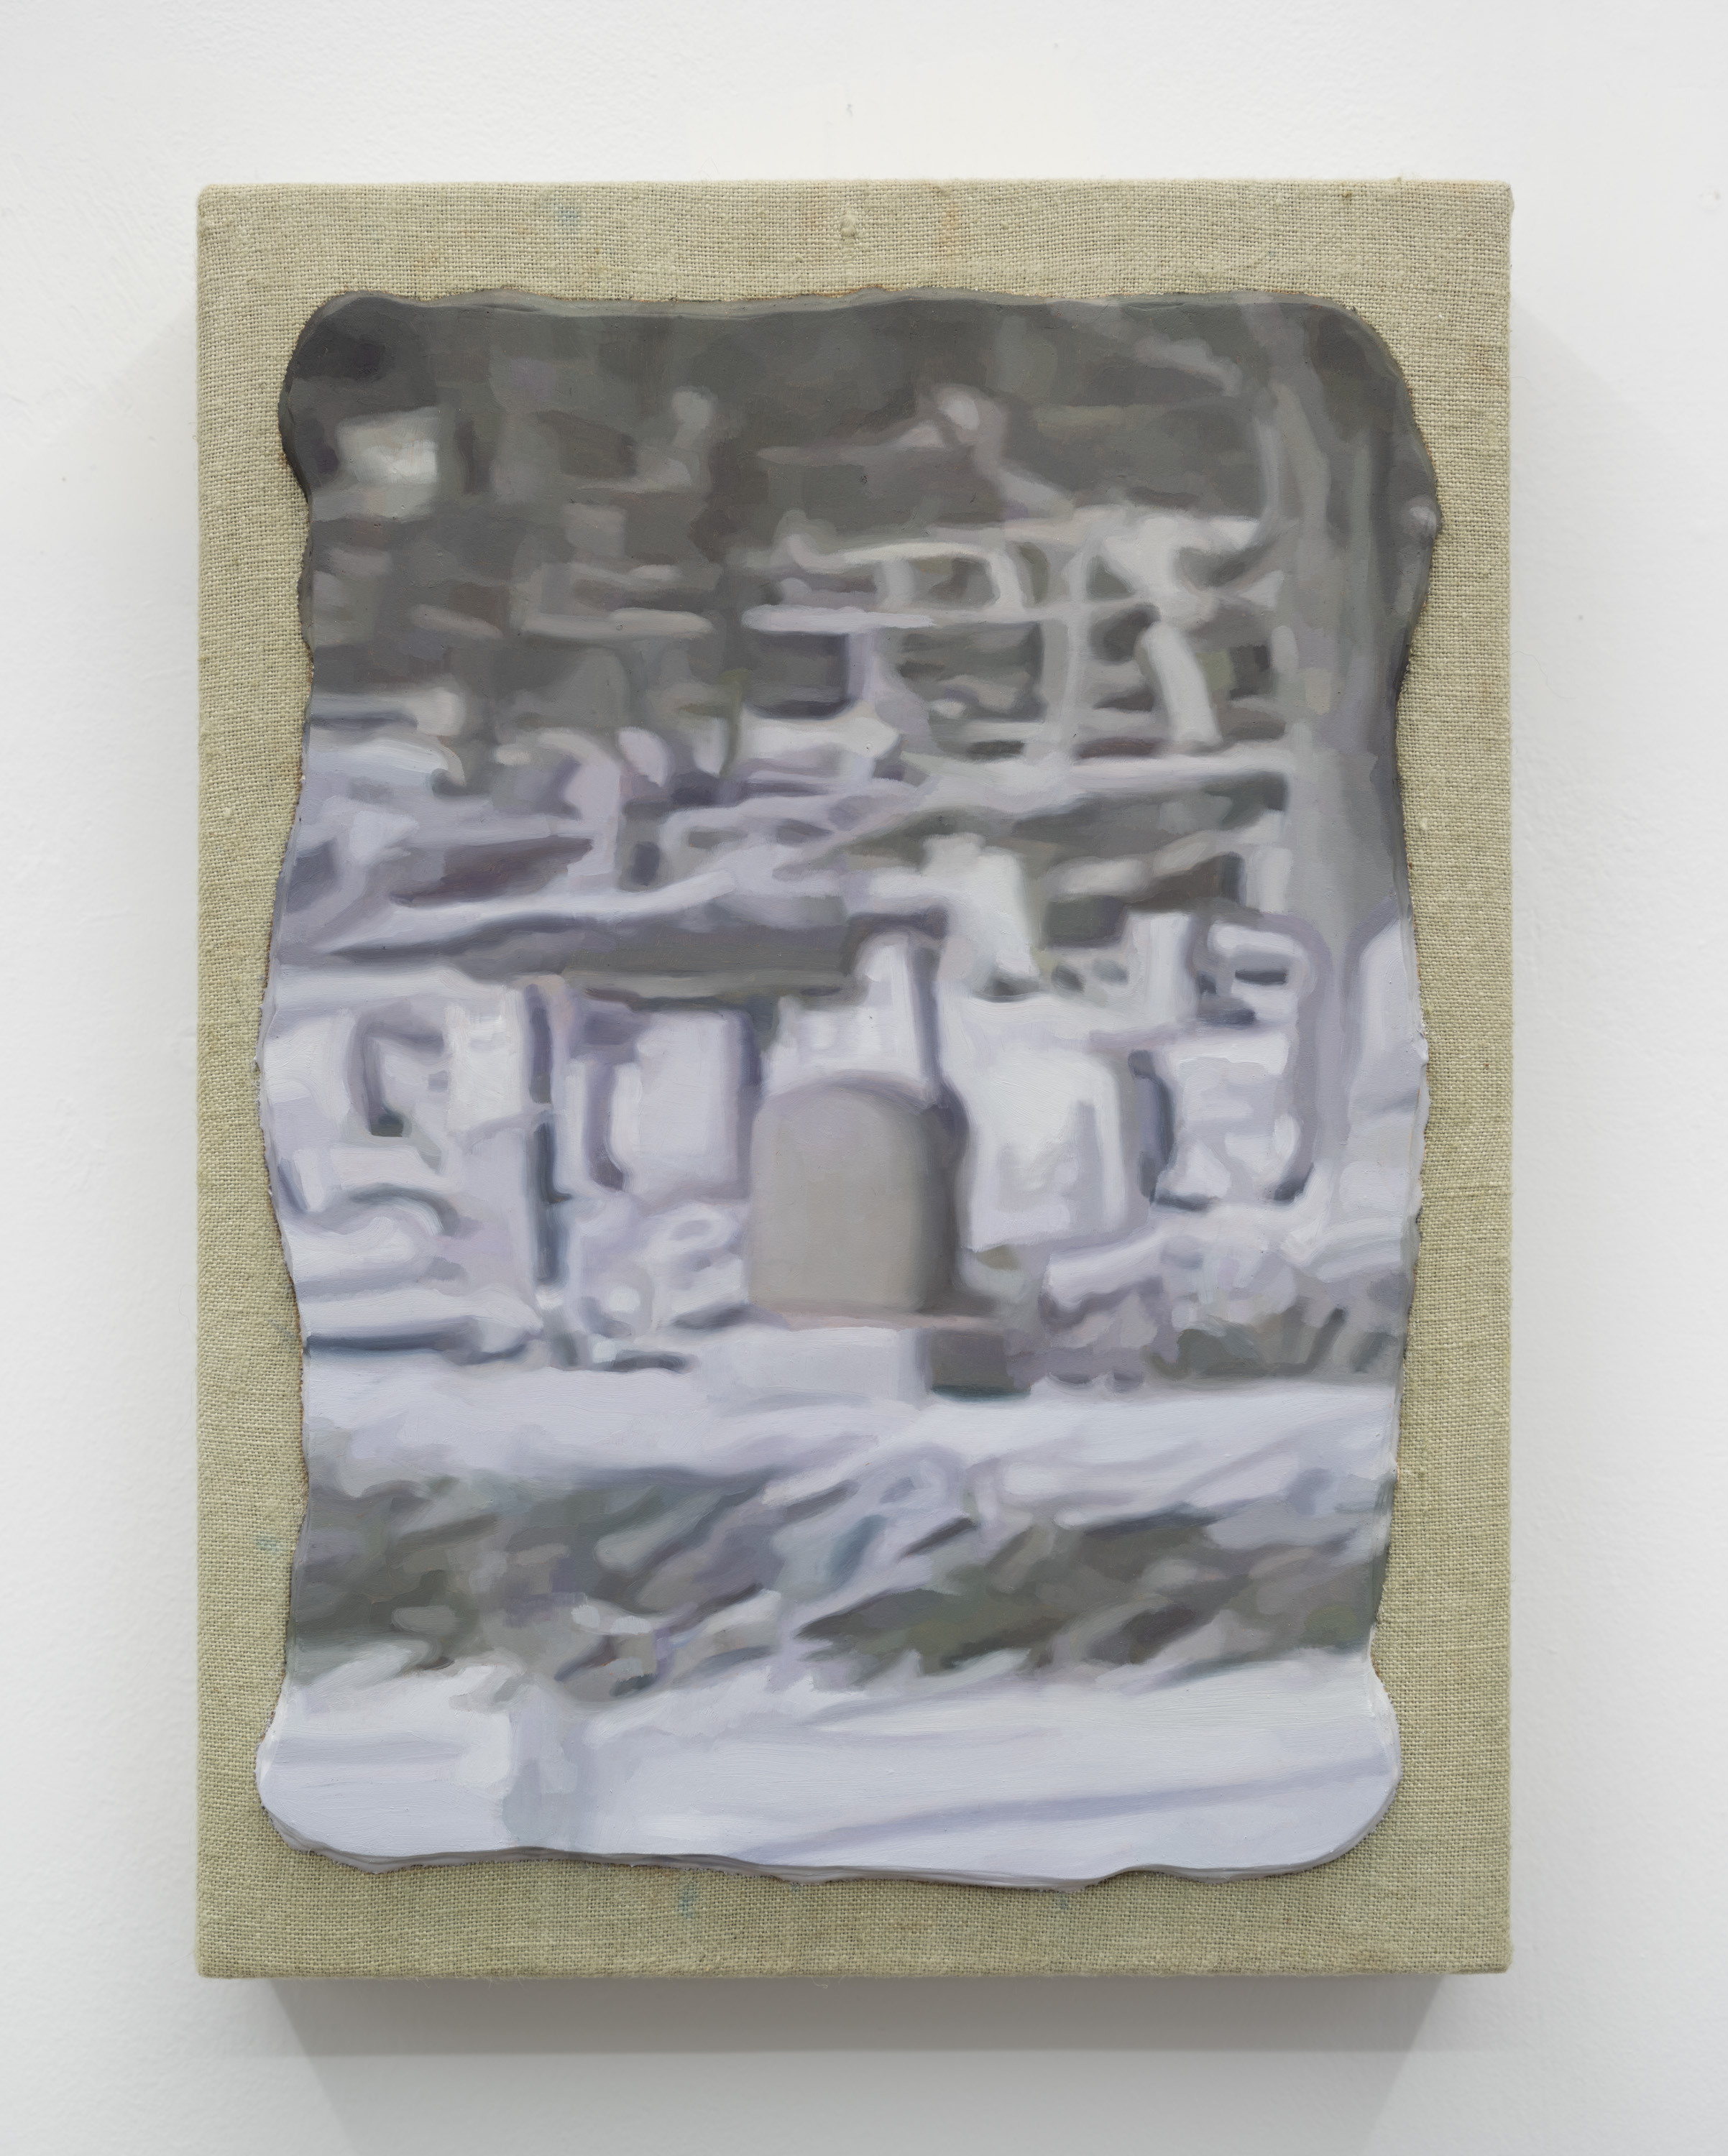 Metope: Grave, 2023 Oil on linen stretched panel 12.25 x 9 inches